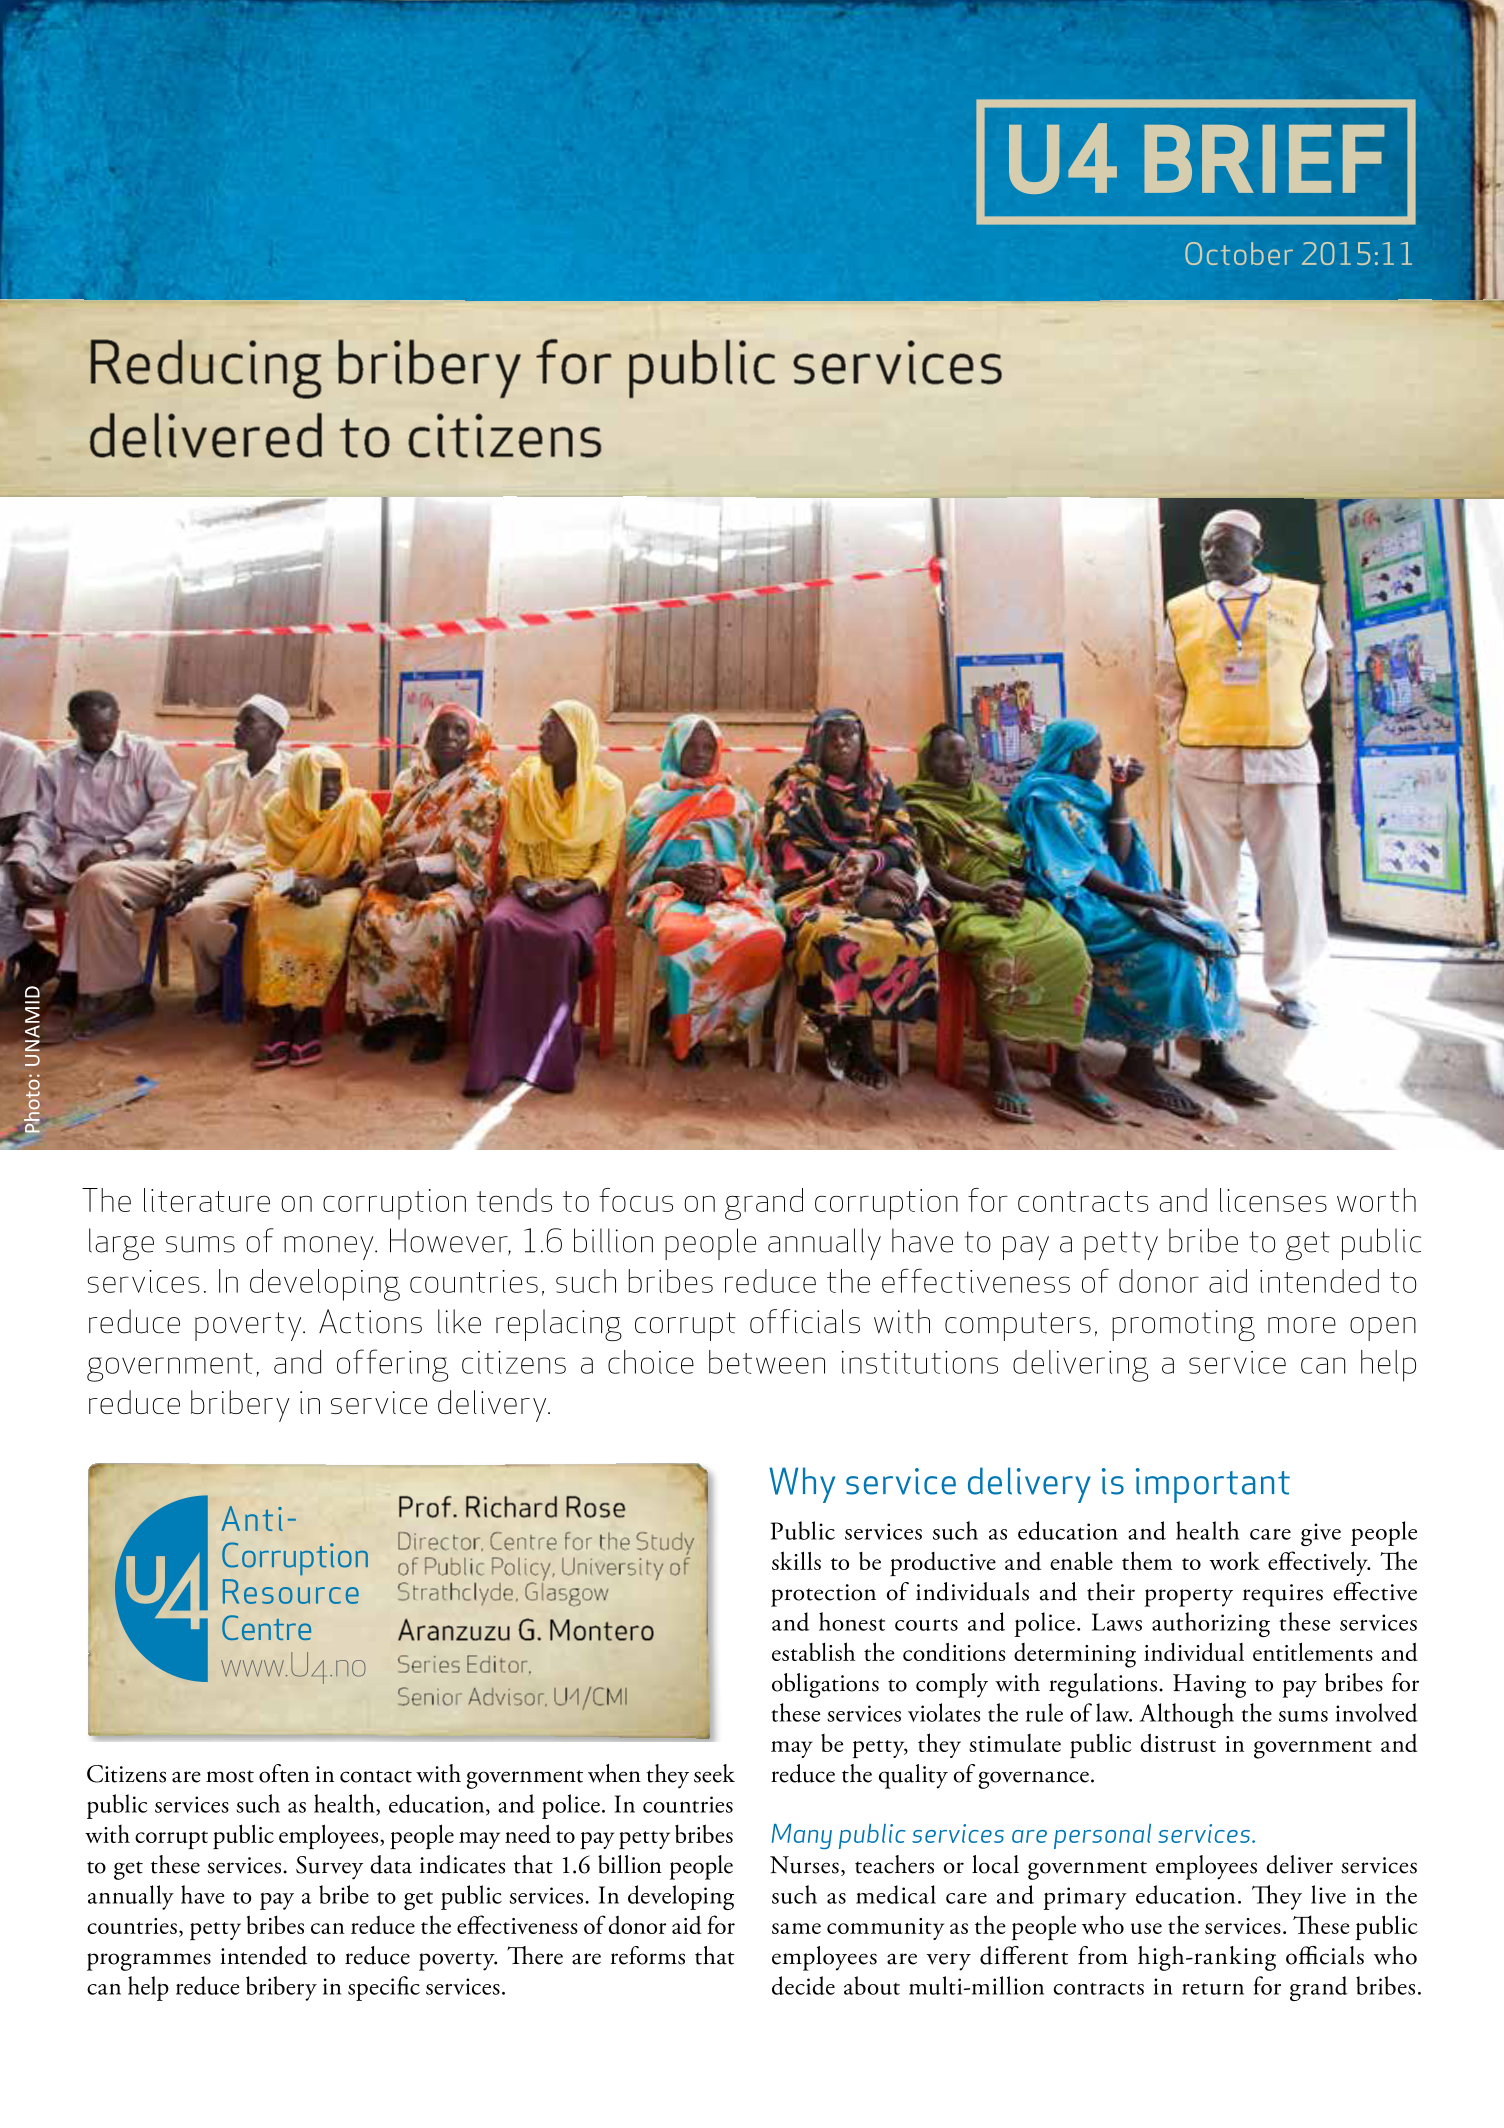 Reducing bribery for public services delivered to citizens